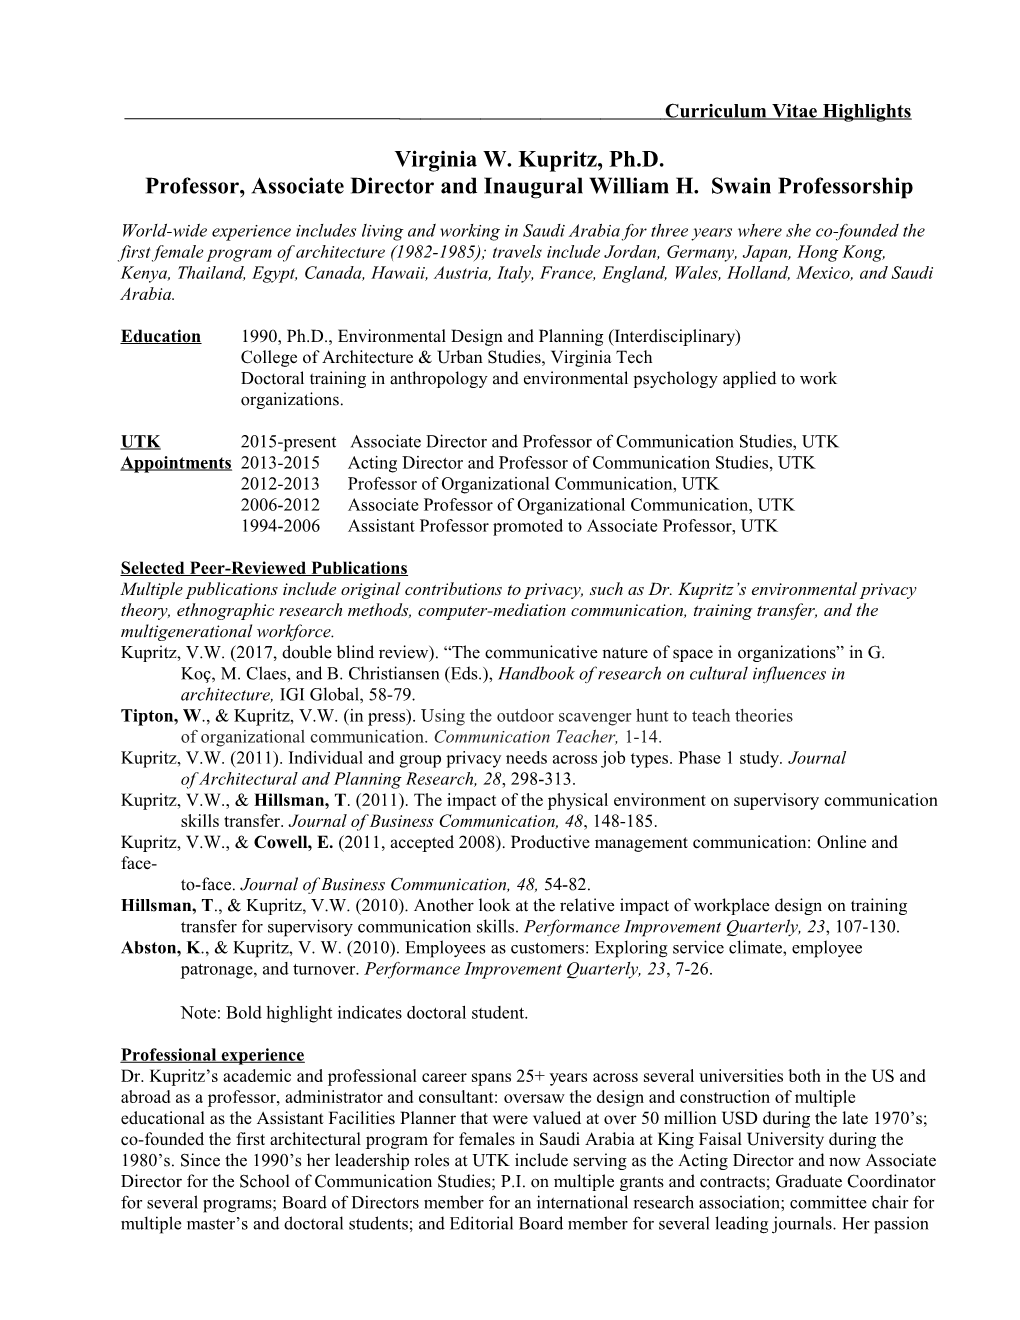 Curriculum Vitae at the University of Tennessee